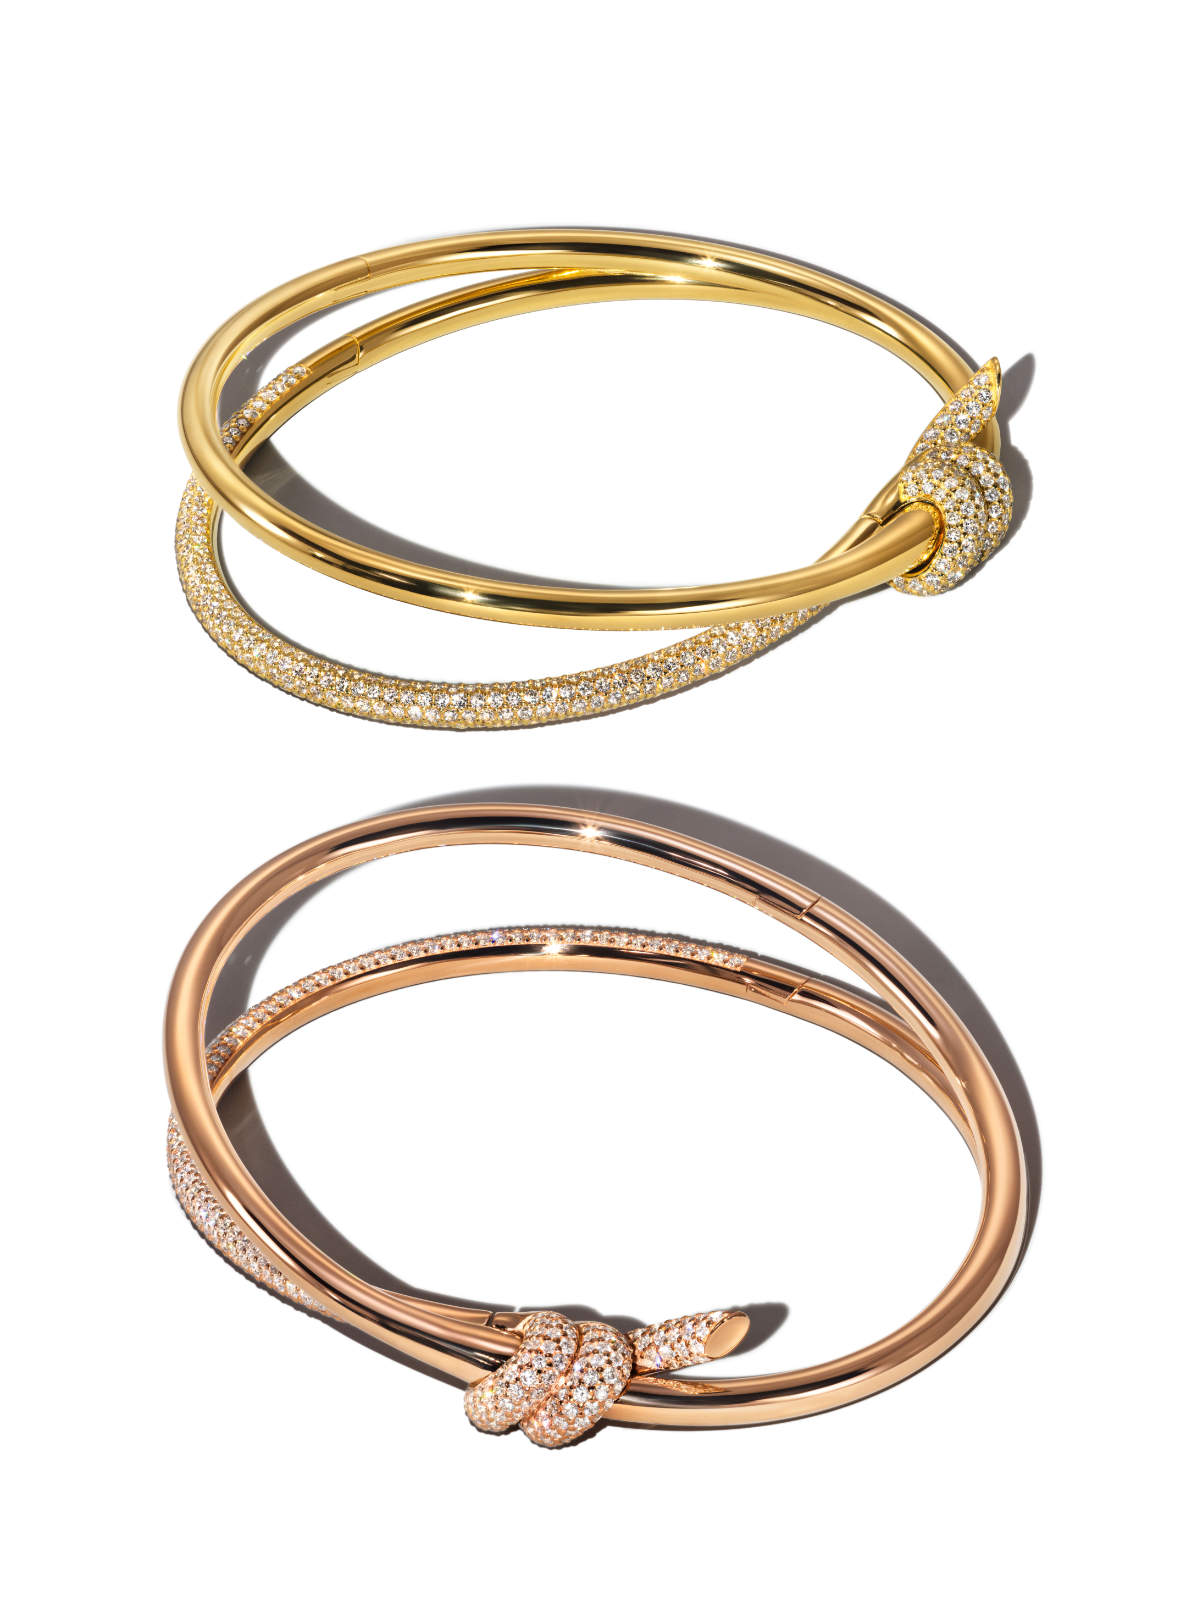 Tiffany & Co. Launches The New Tiffany Knot Collection